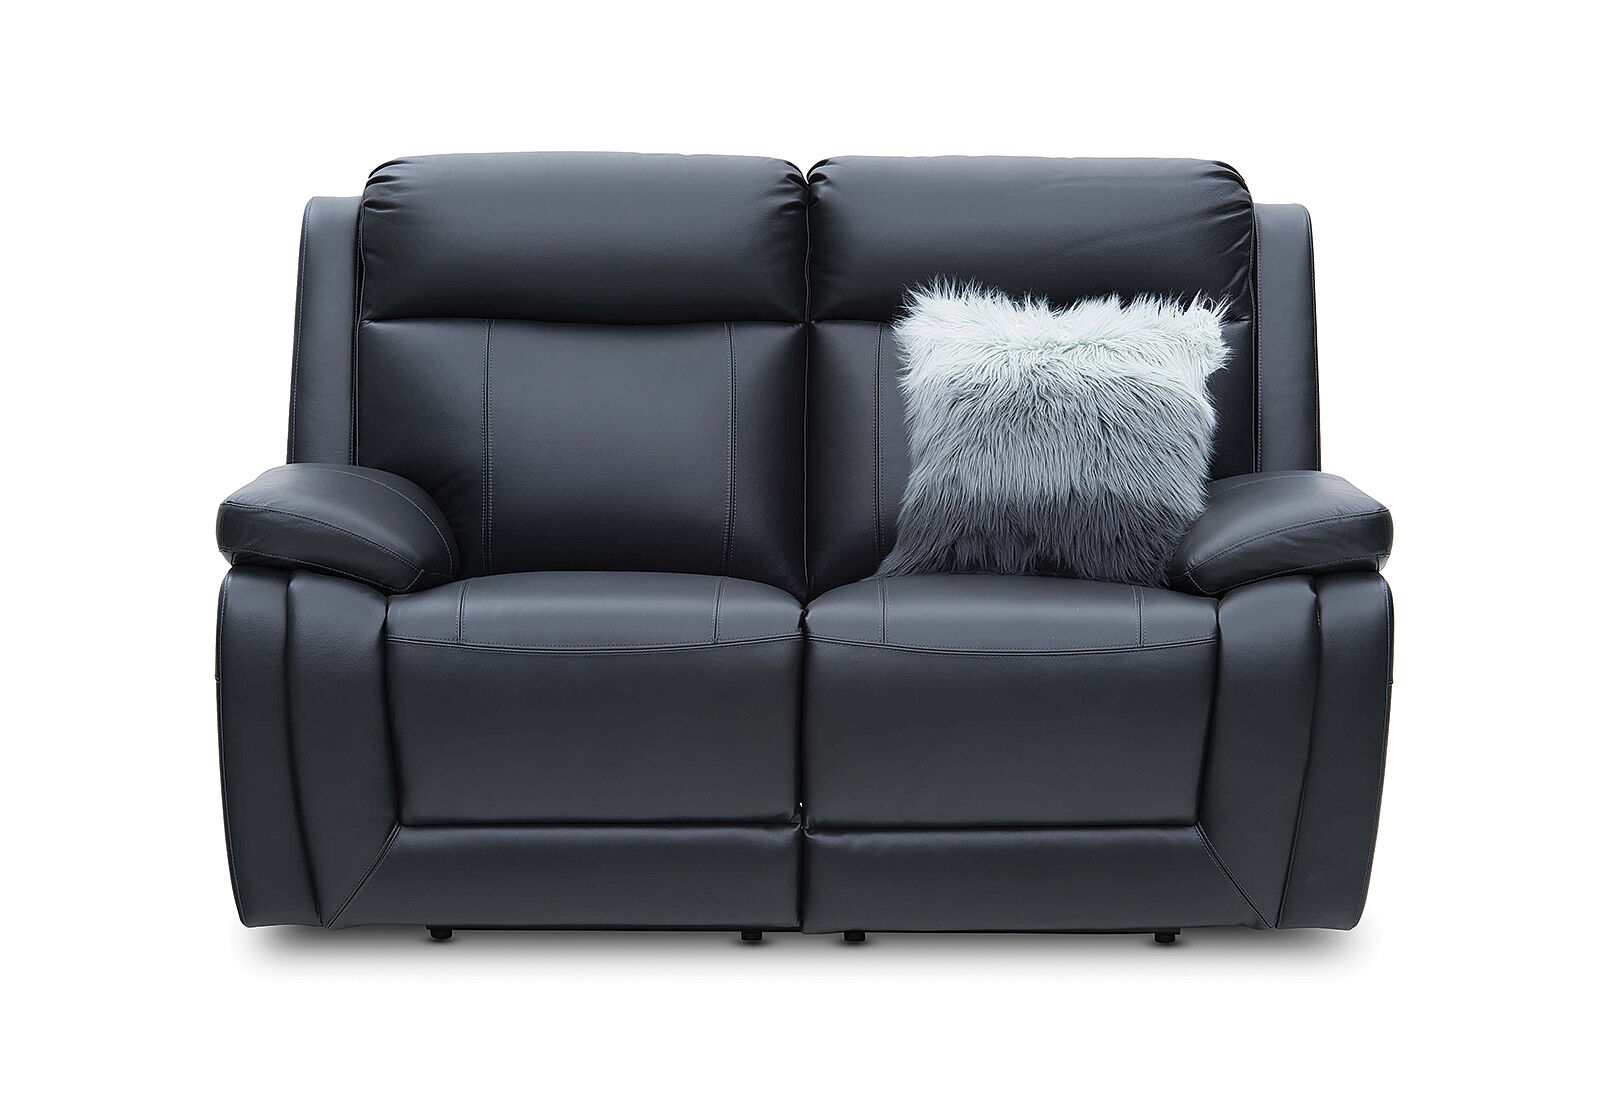 Black San Marco Leather 2 Seater Sofa, Leather 2 Seater Sofa Recliner